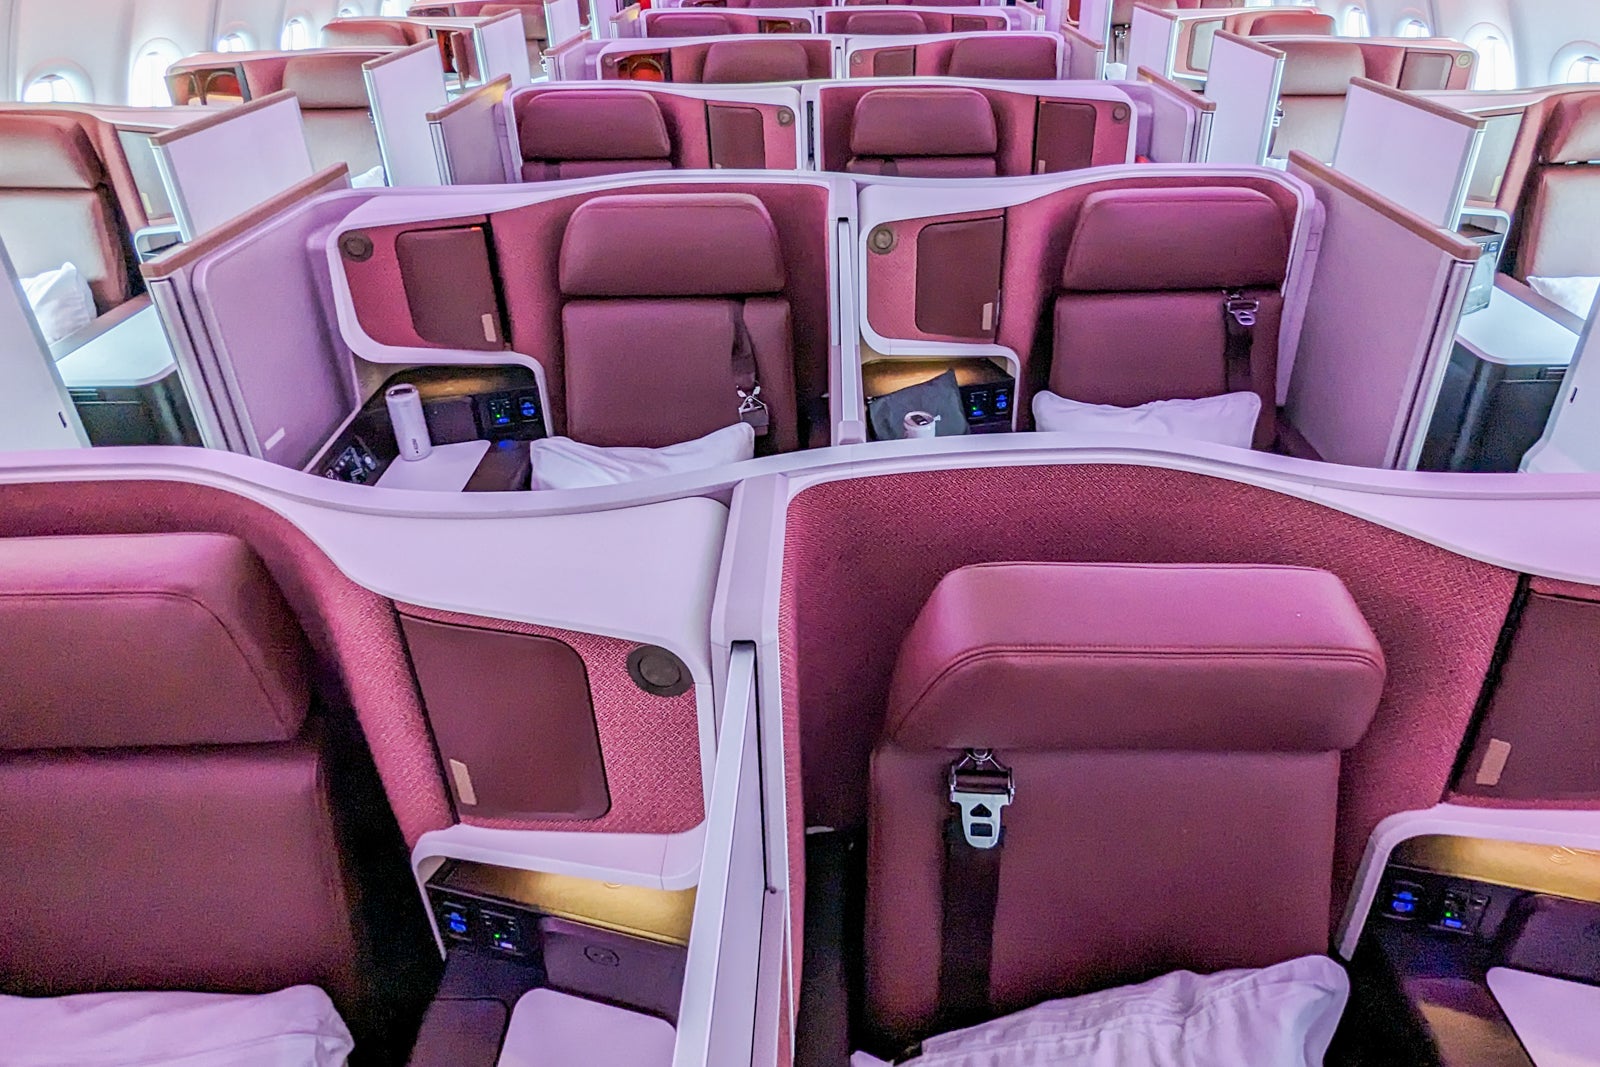 Complete guide to getting value from Virgin Atlantic Flying Club